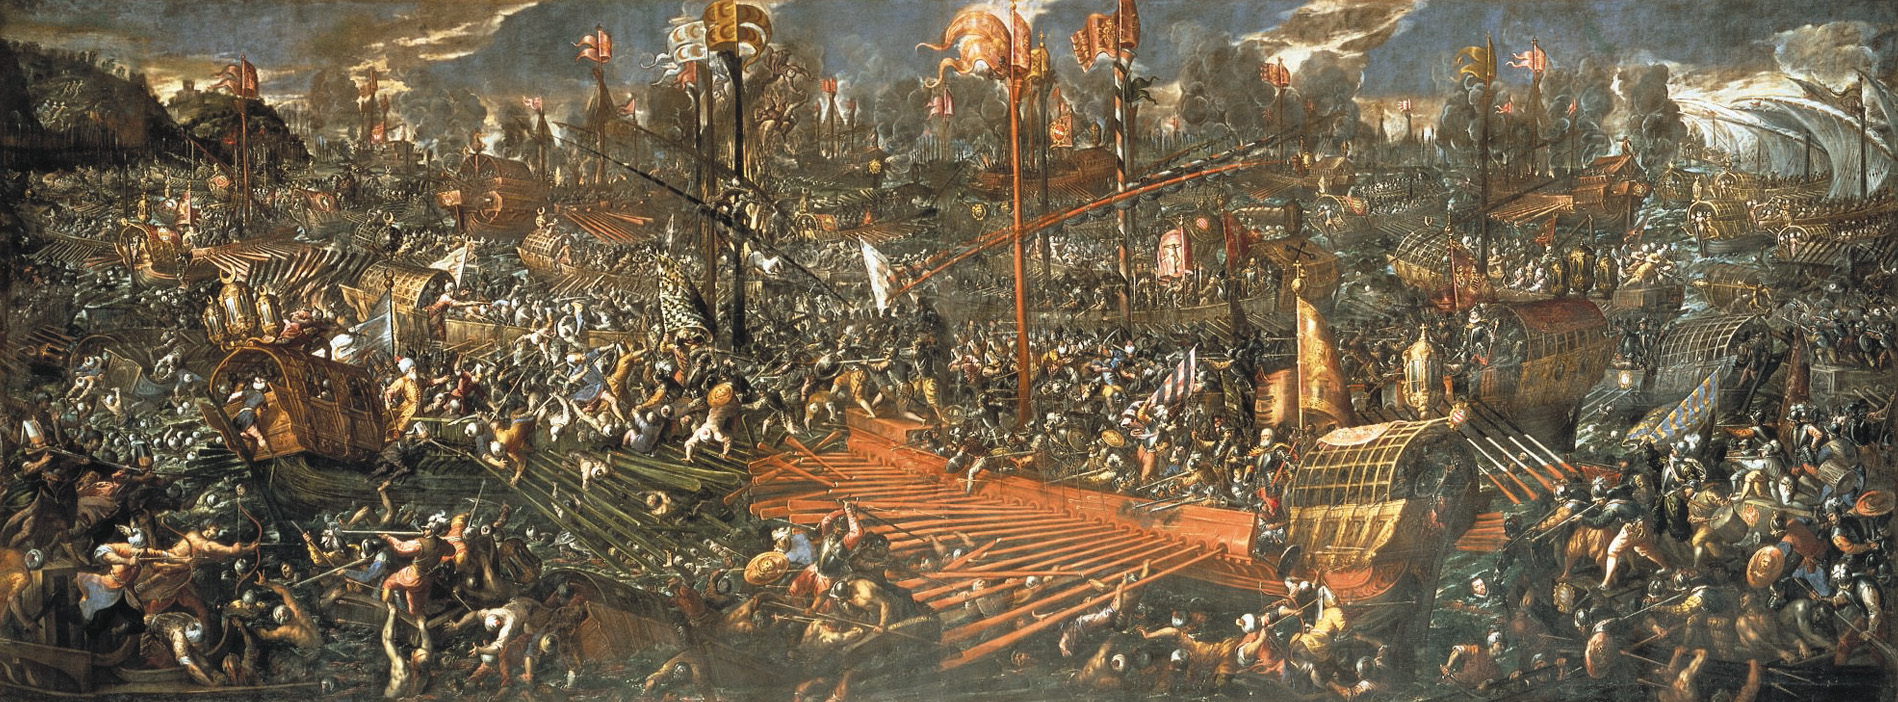 A Venetian galley on the left flank attacks a Turkish ship. Arquebusiers fire on the Turks in the great sea battle that was a large risk for both sides. Doge Sebastiano Veniero (white beard) stands at the right. 